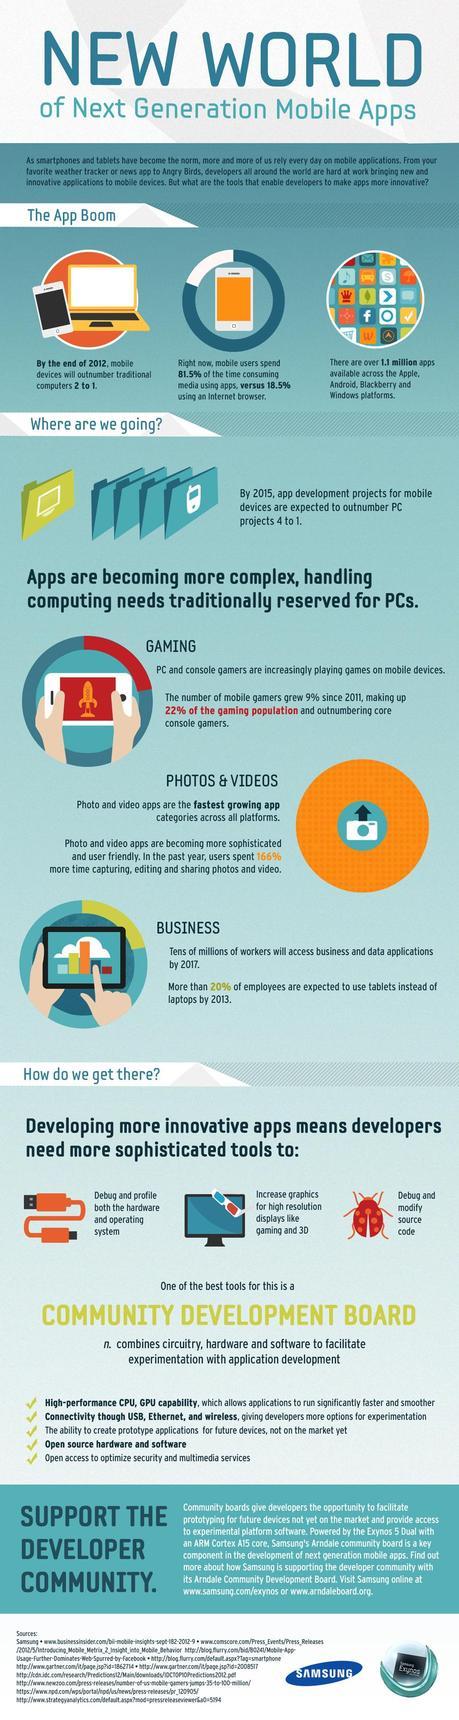 Next Generation of Mobile Apps Infographic